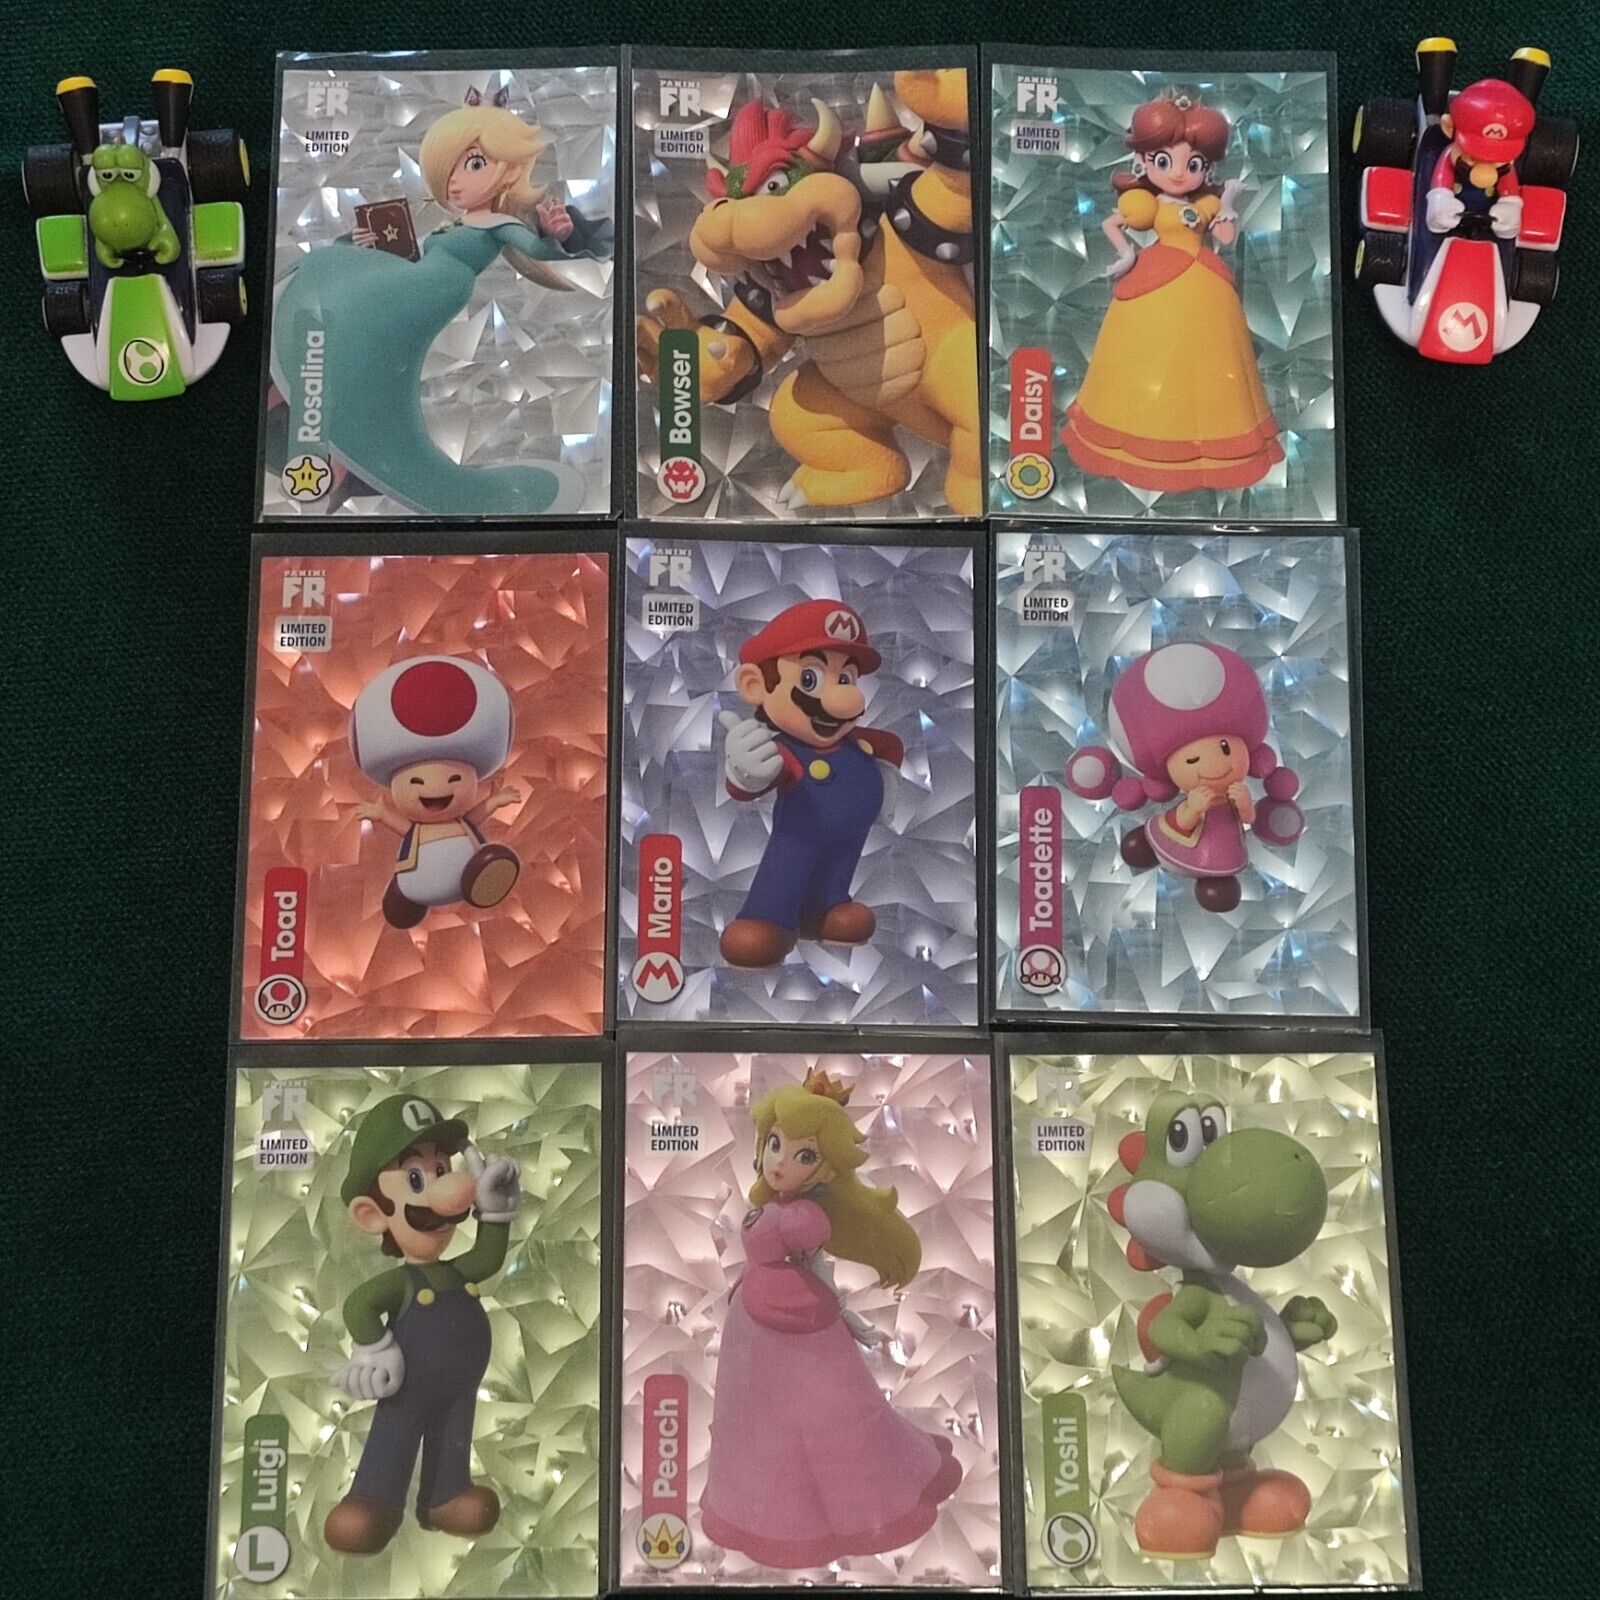 Super Mario LIMITED EDITION FULL SET COMPLETE 1-9